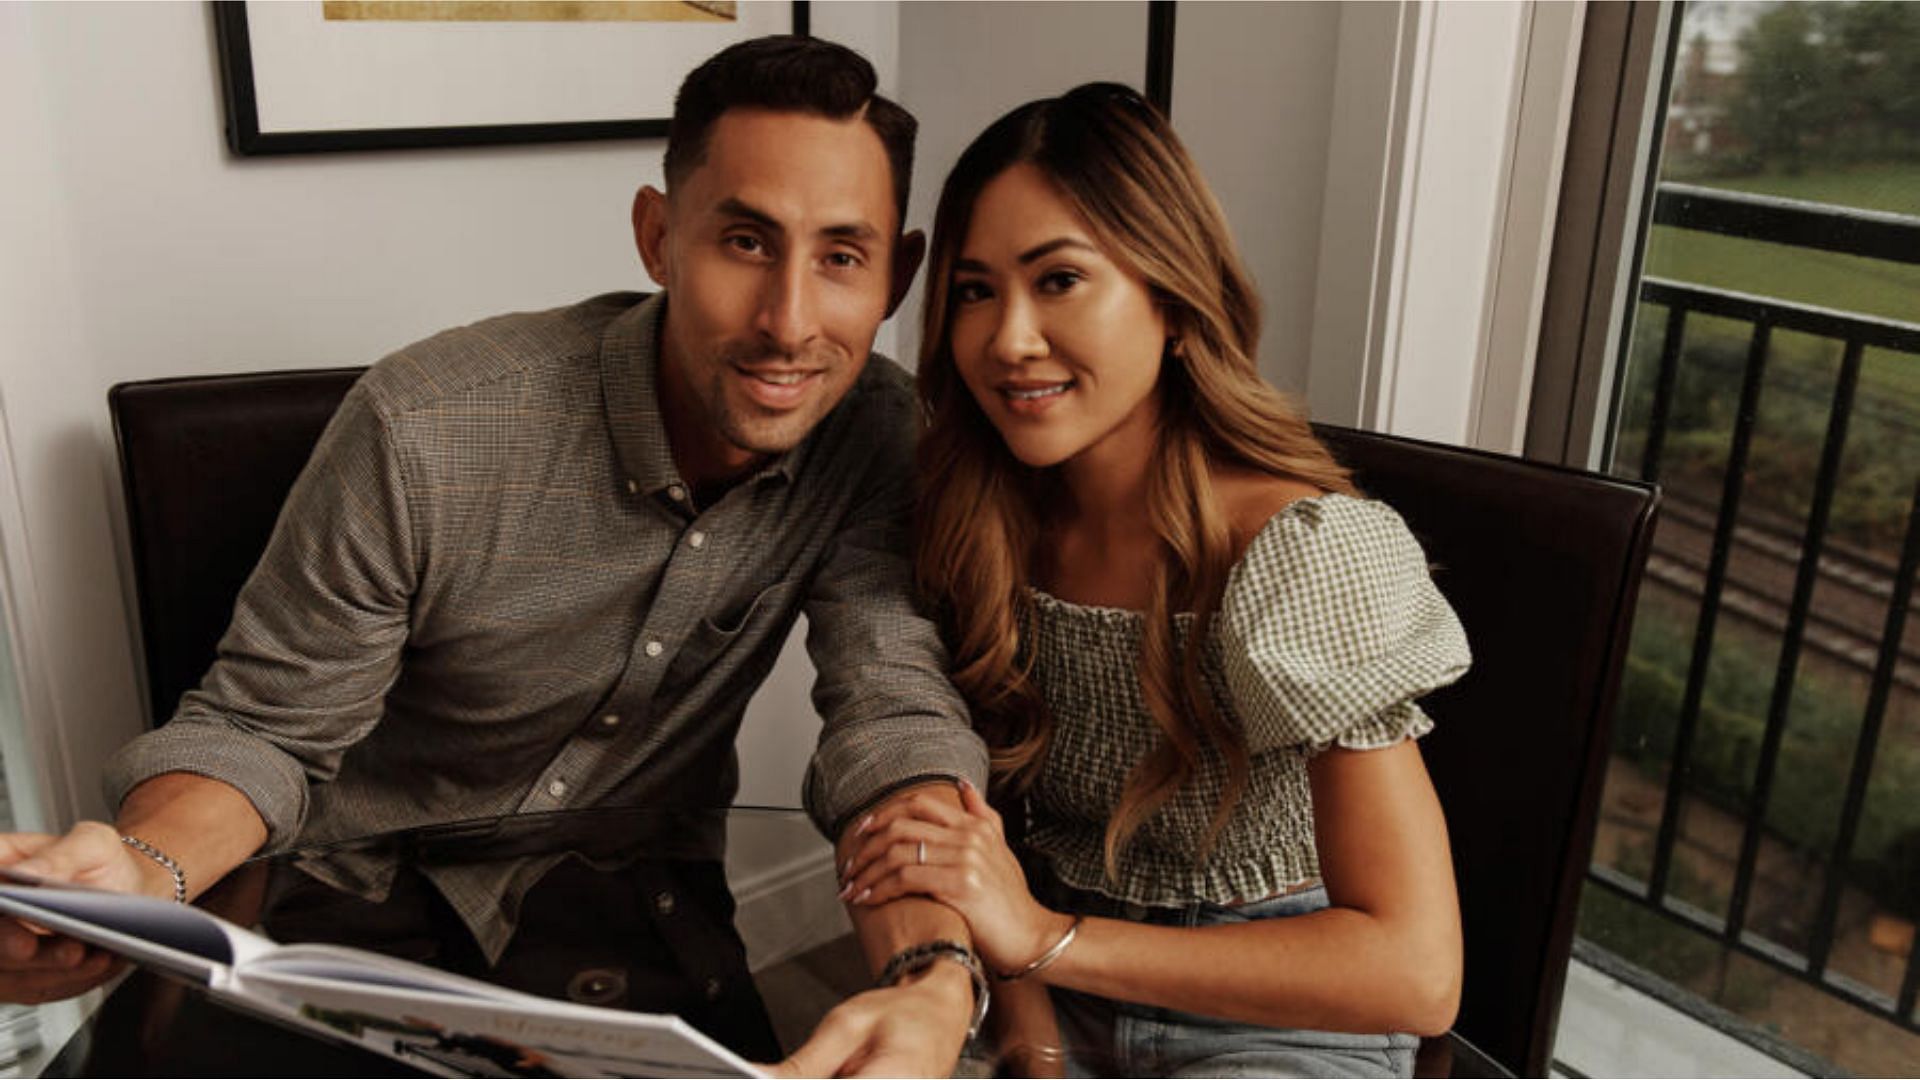 Steve Moy and Noi Phommasak from Married at First Sight season 14 (Image via Lifetime)